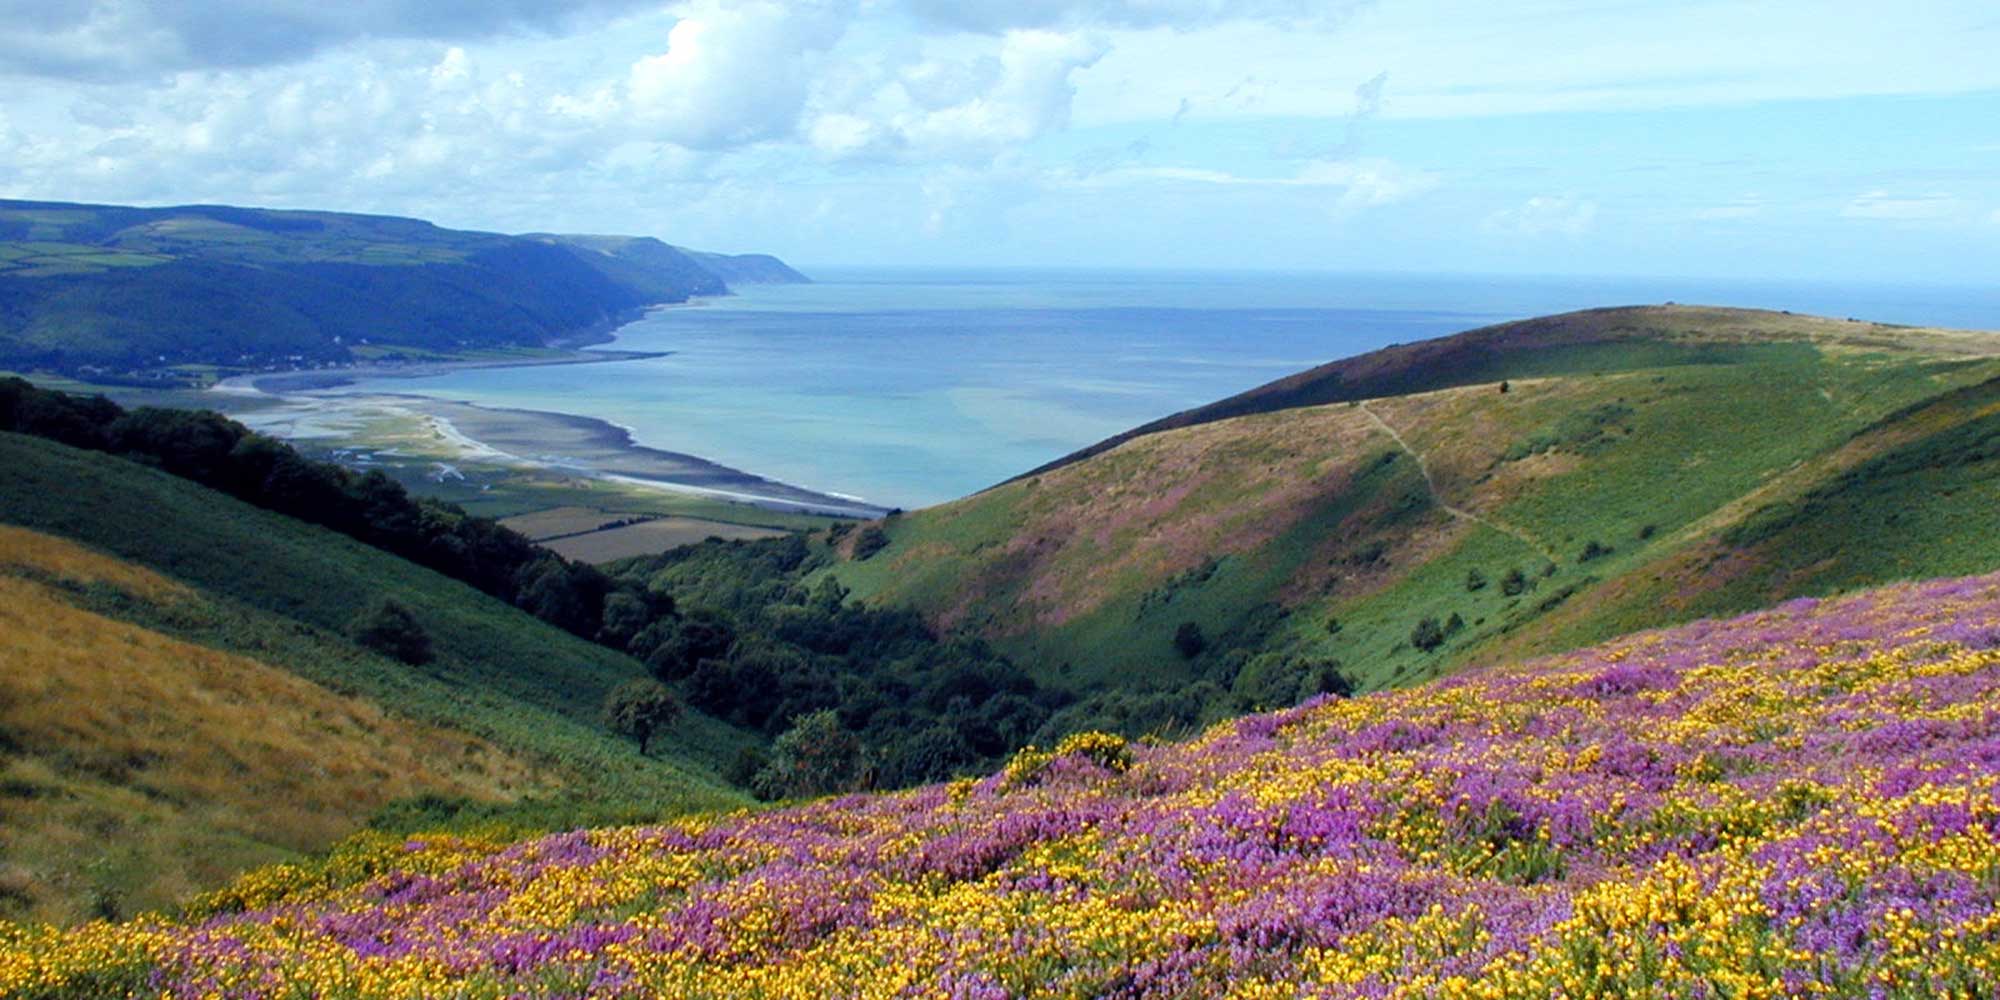 Colourful gorse and heather on a clifftop with a view over the sea below